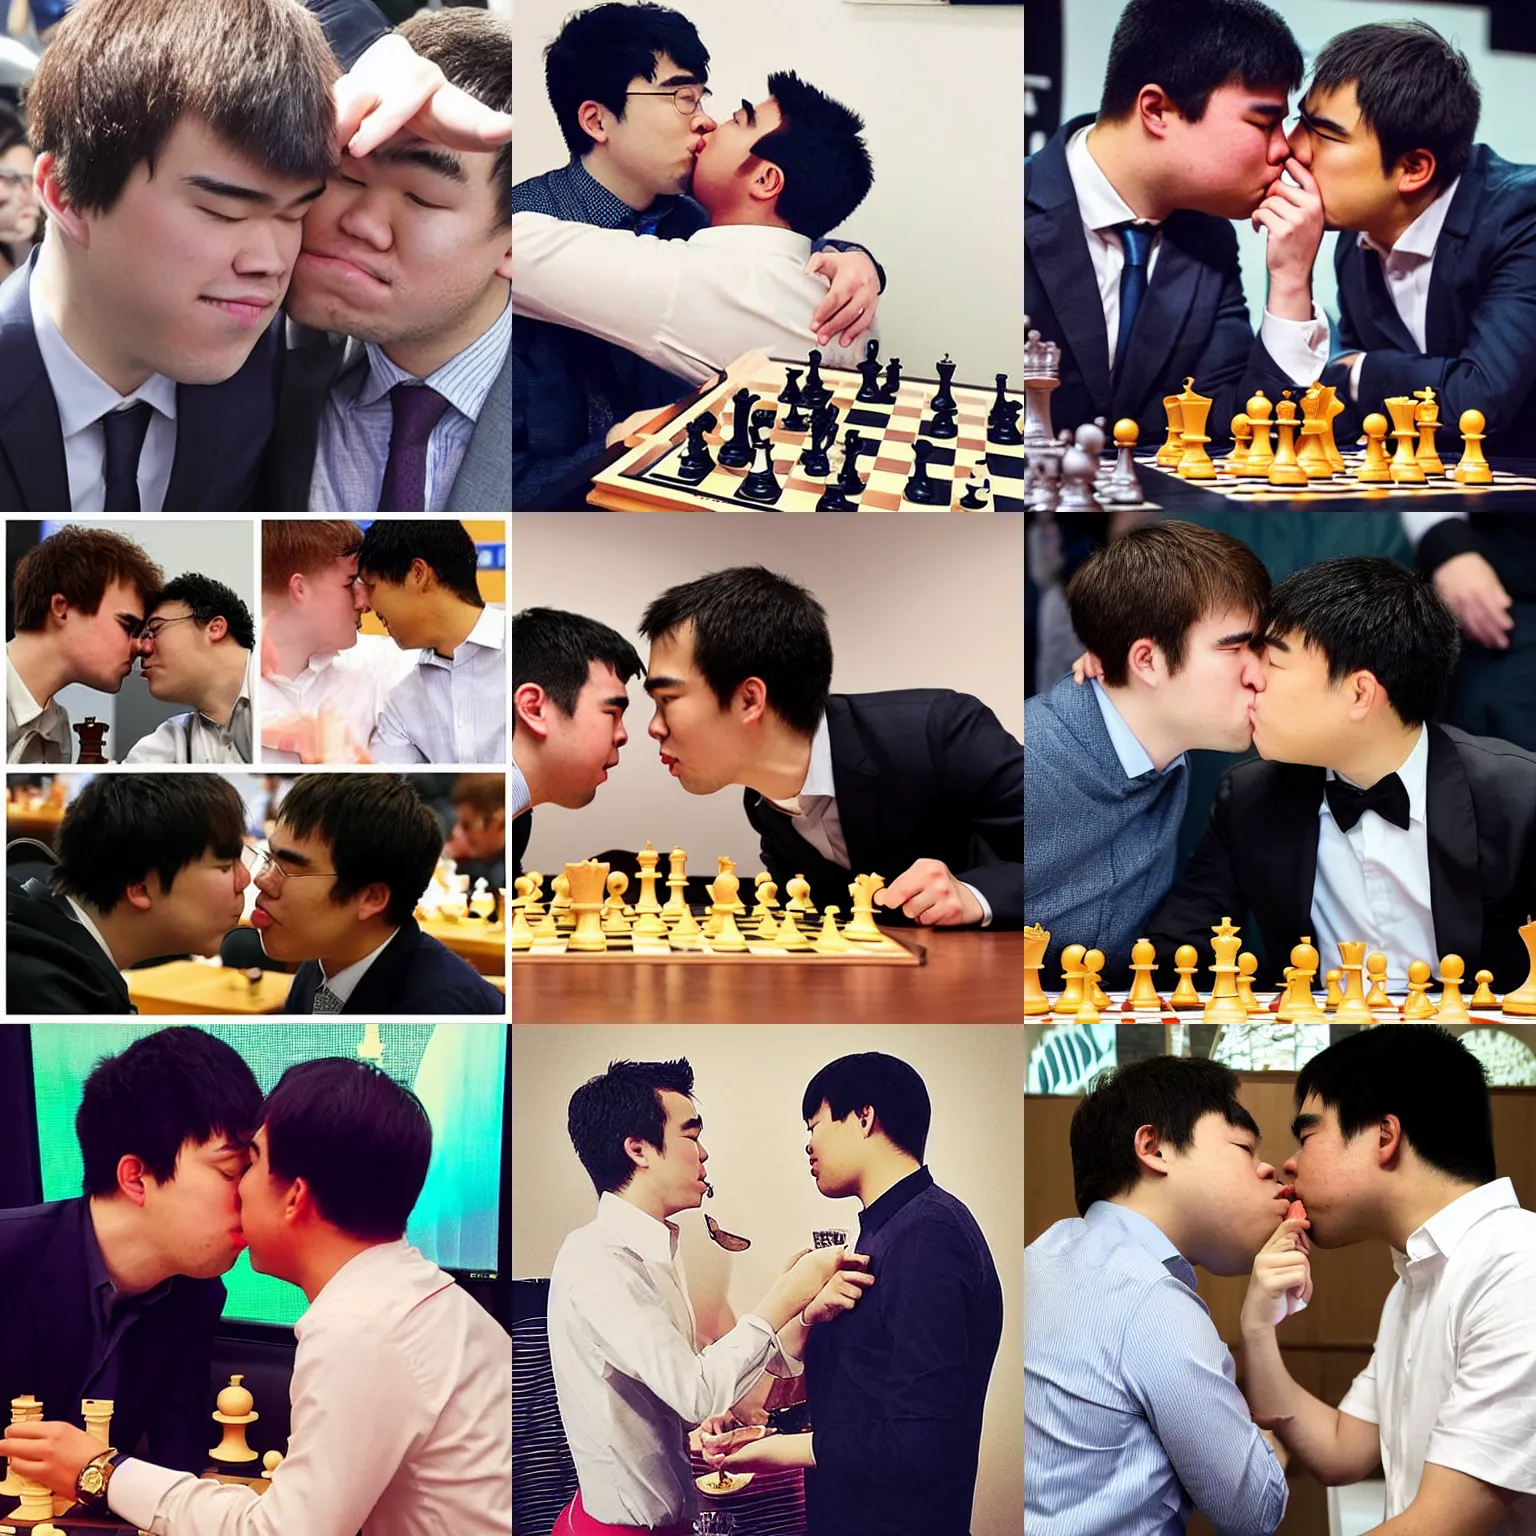 Prompt: “World chess champion Magnus carlsen kissing twitch streamer hikaru nakamura. They are furiously making out”